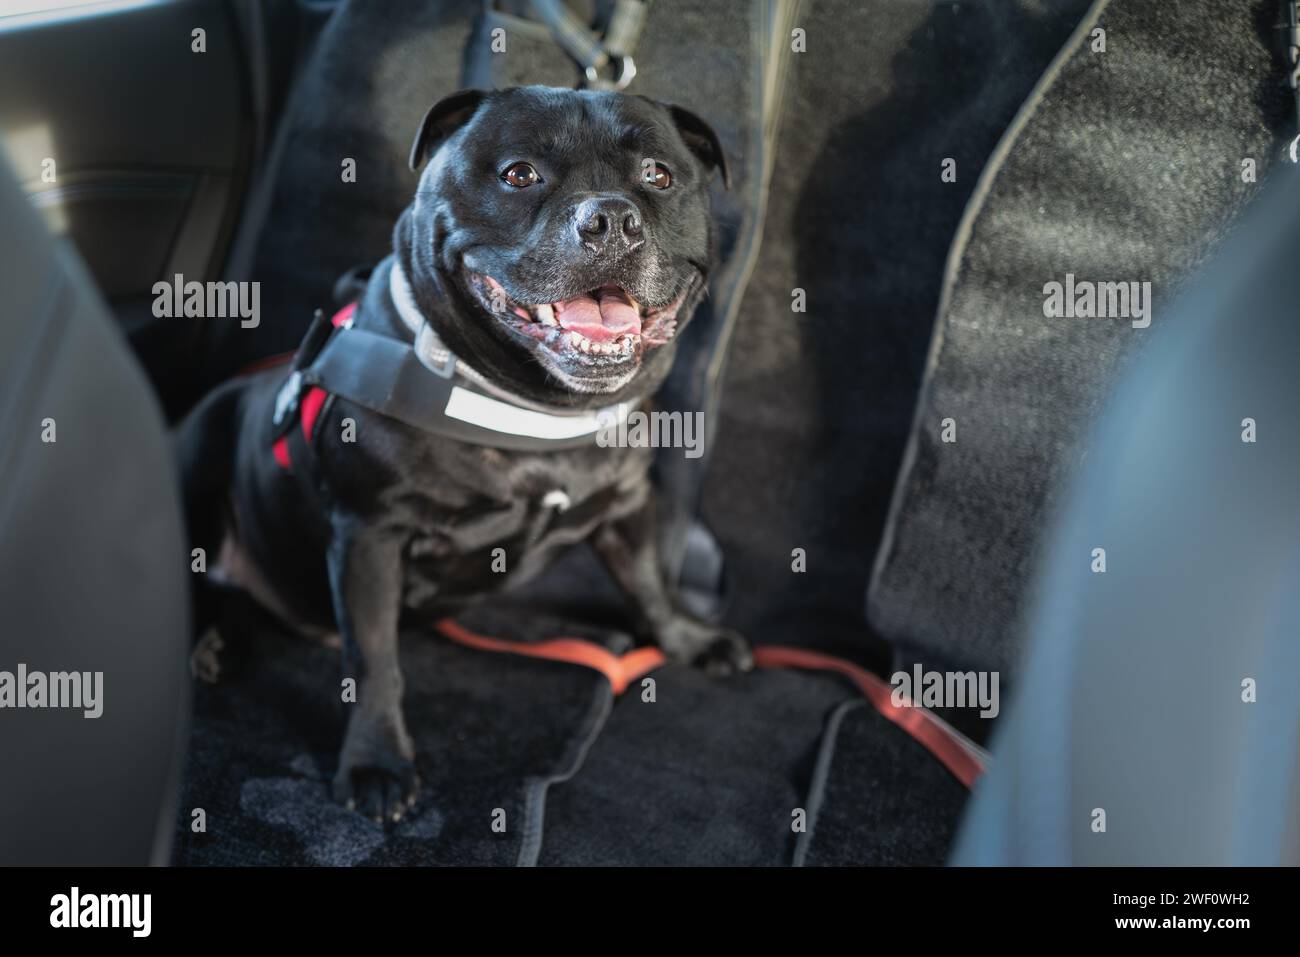 Staffordshire Bull Terrier dog on the rear, back seat of a car. He is wearing a harness and attatched with a clip. The seats have pet protection cover Stock Photo